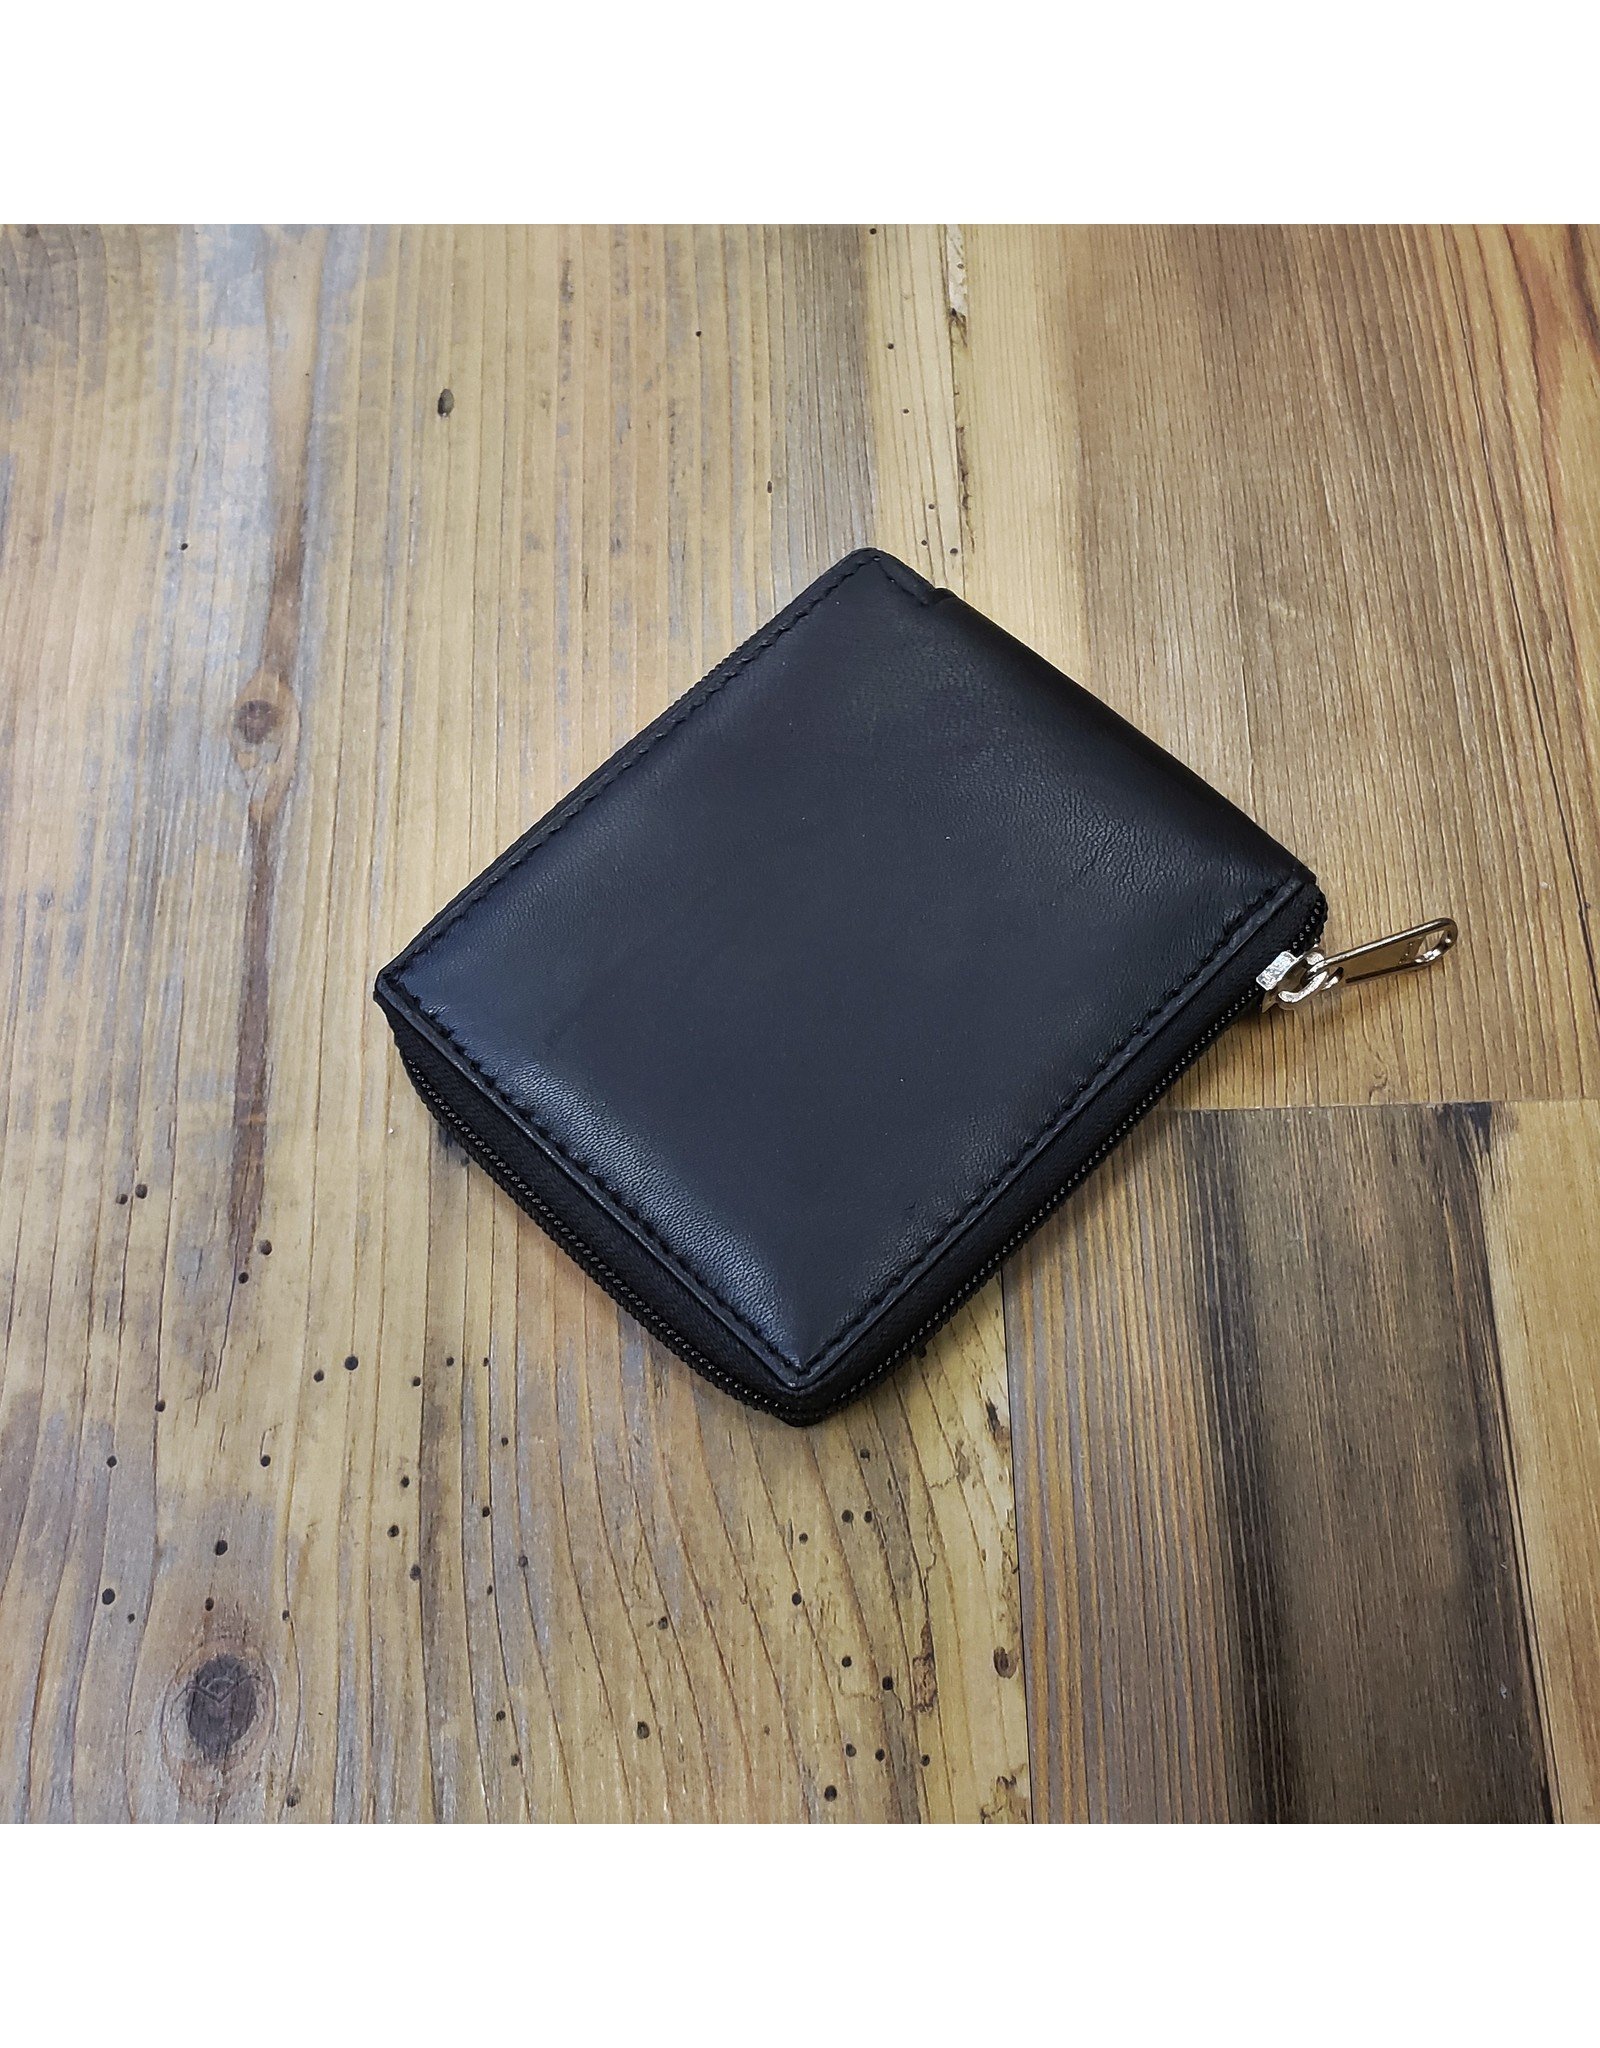 KANU LEATHER WALLET ID PROTECT ZIPPER K201